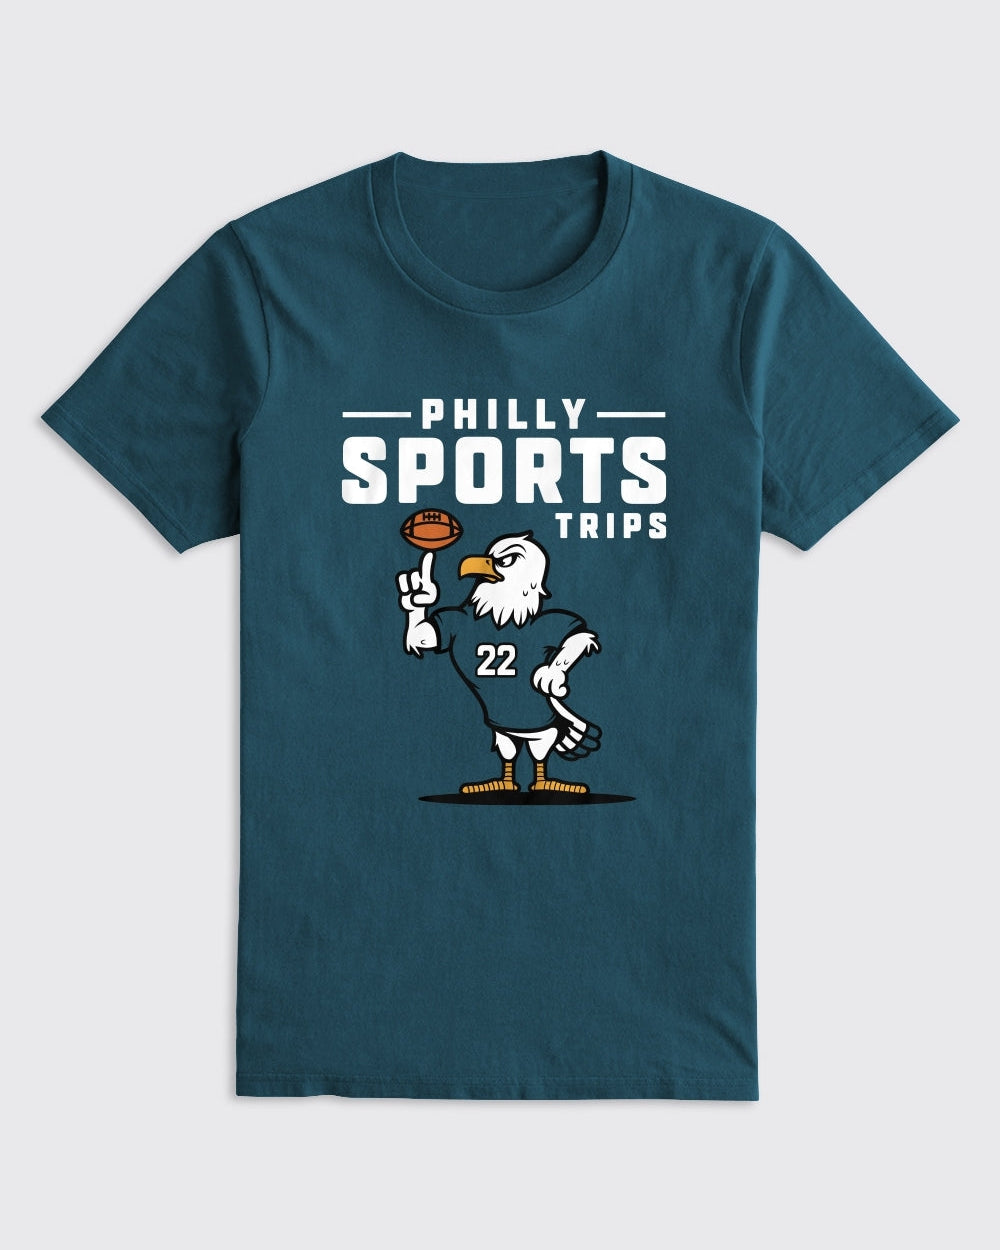 PST Birds 2022 Tailgate Shirt - Philly Sports Trips - Philly Sports Shirts